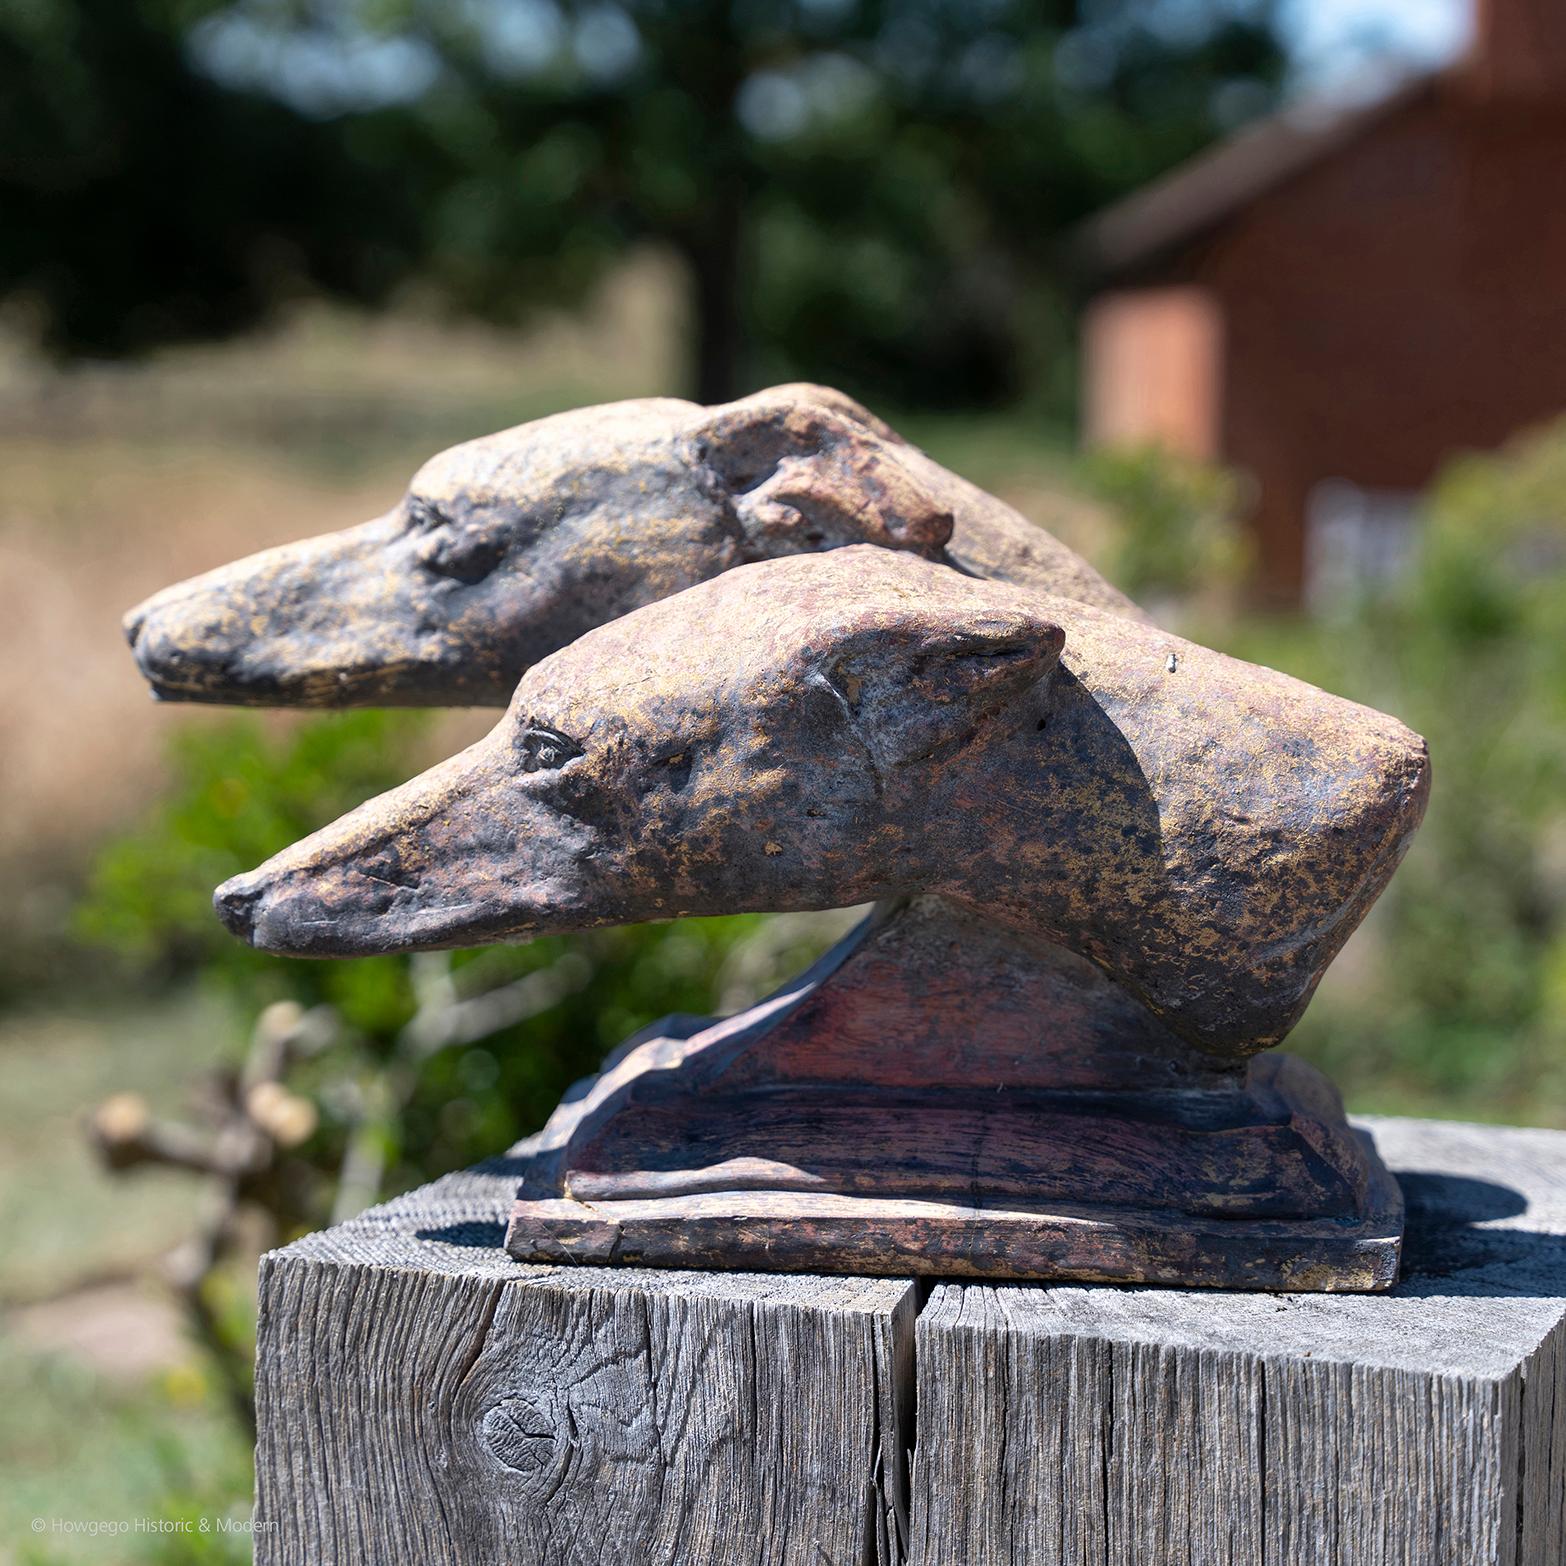 Striking sculpture of two greyhound heads
Captures the character, intelligence and presence of the greyhound
Suitable for the garden or interior

Measures: length 43cm.,17